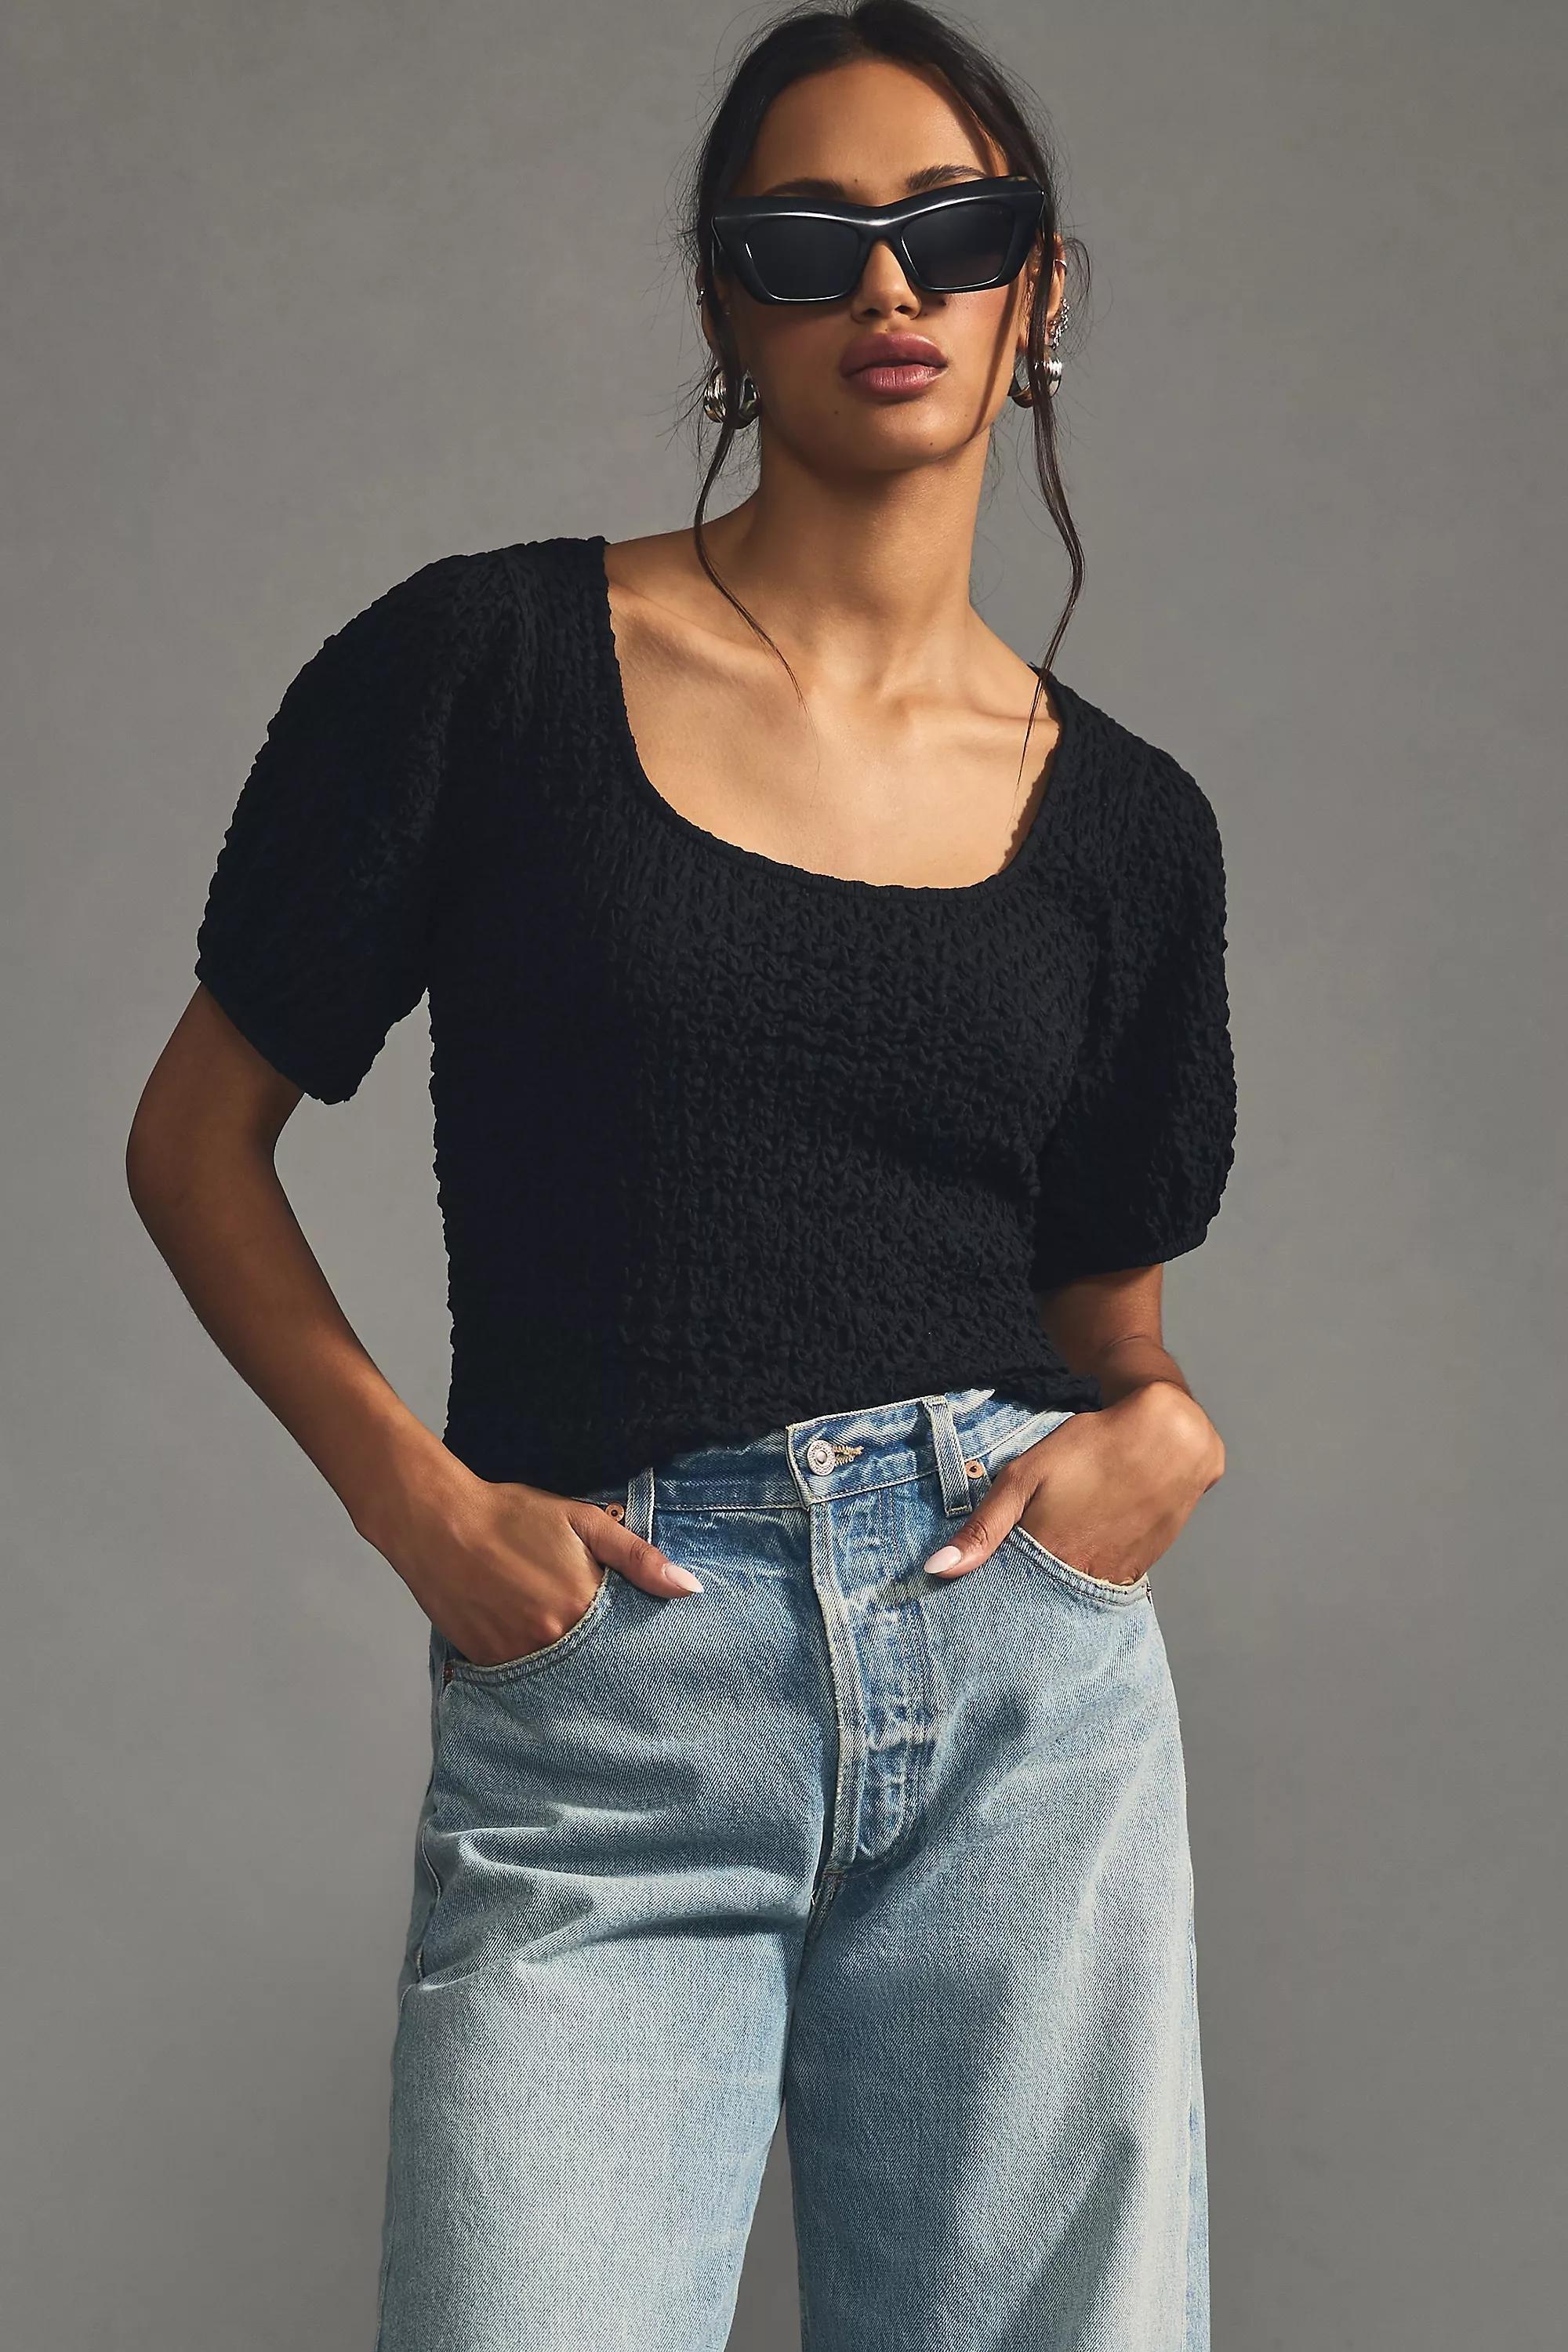 Anthropologie - Lea  And Viola Puff Short-Sleeve Textured Top, Black